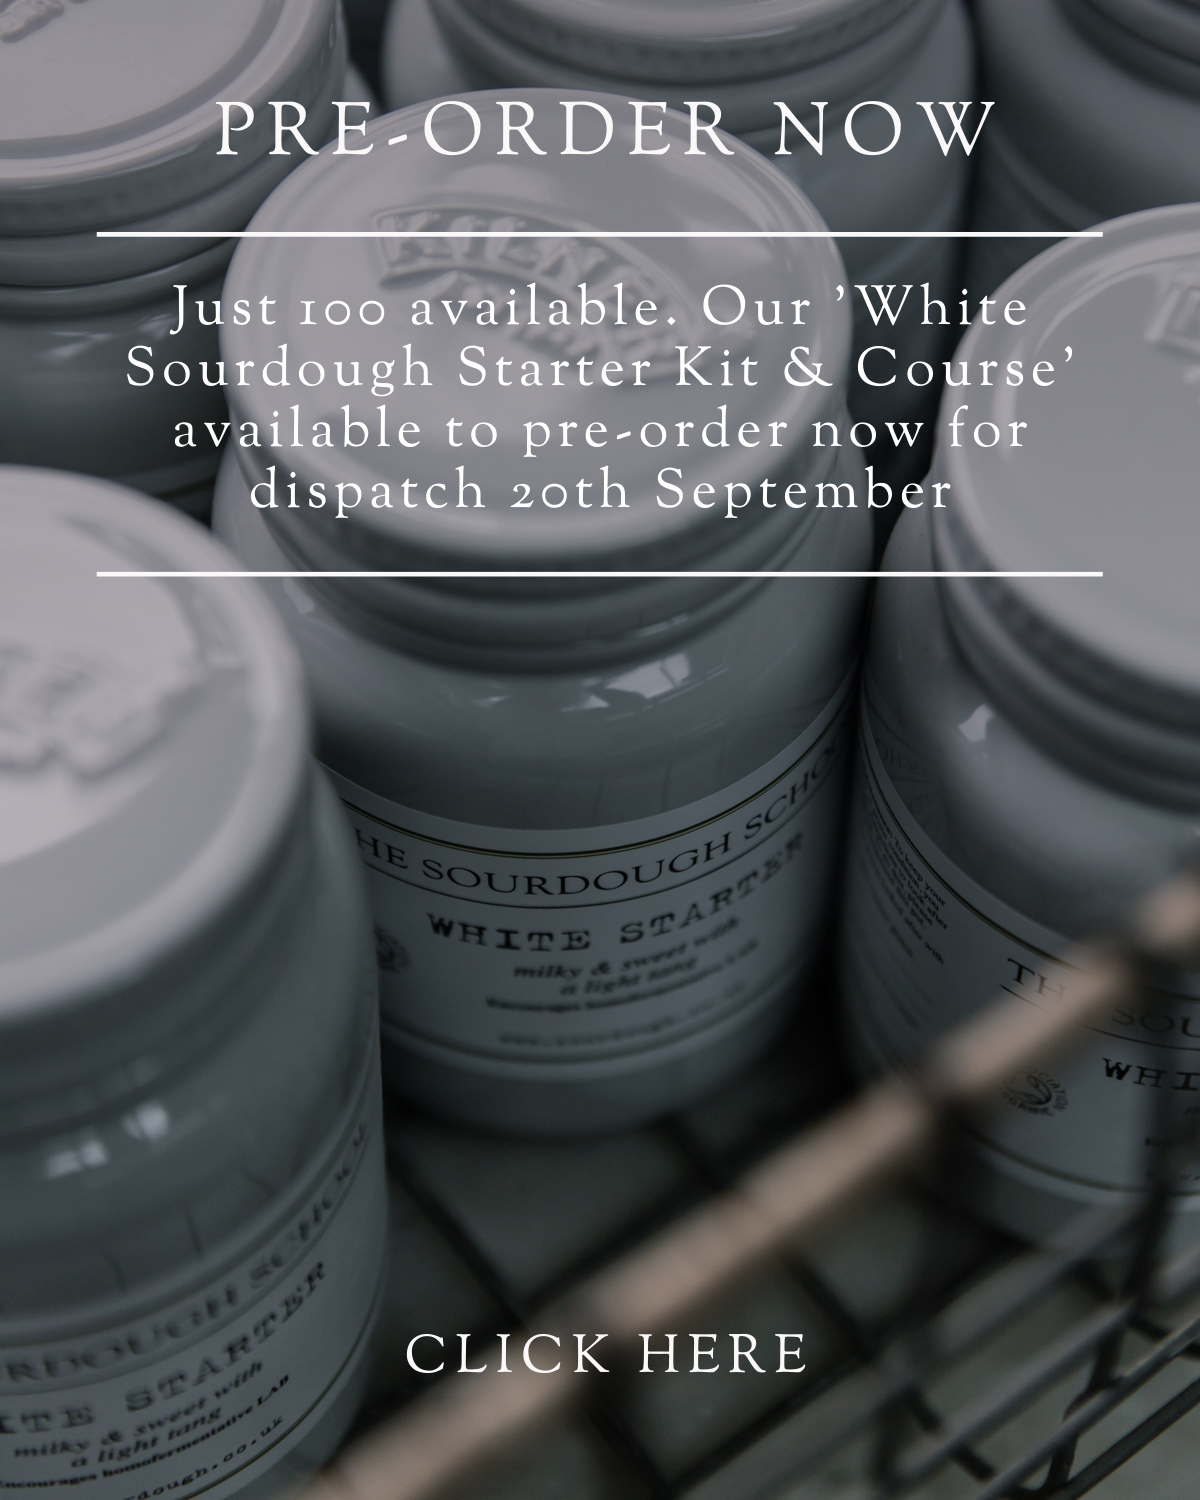 Last chance to order our &#8216;White Sourdough Starter Kit &#038; Course&#8217;